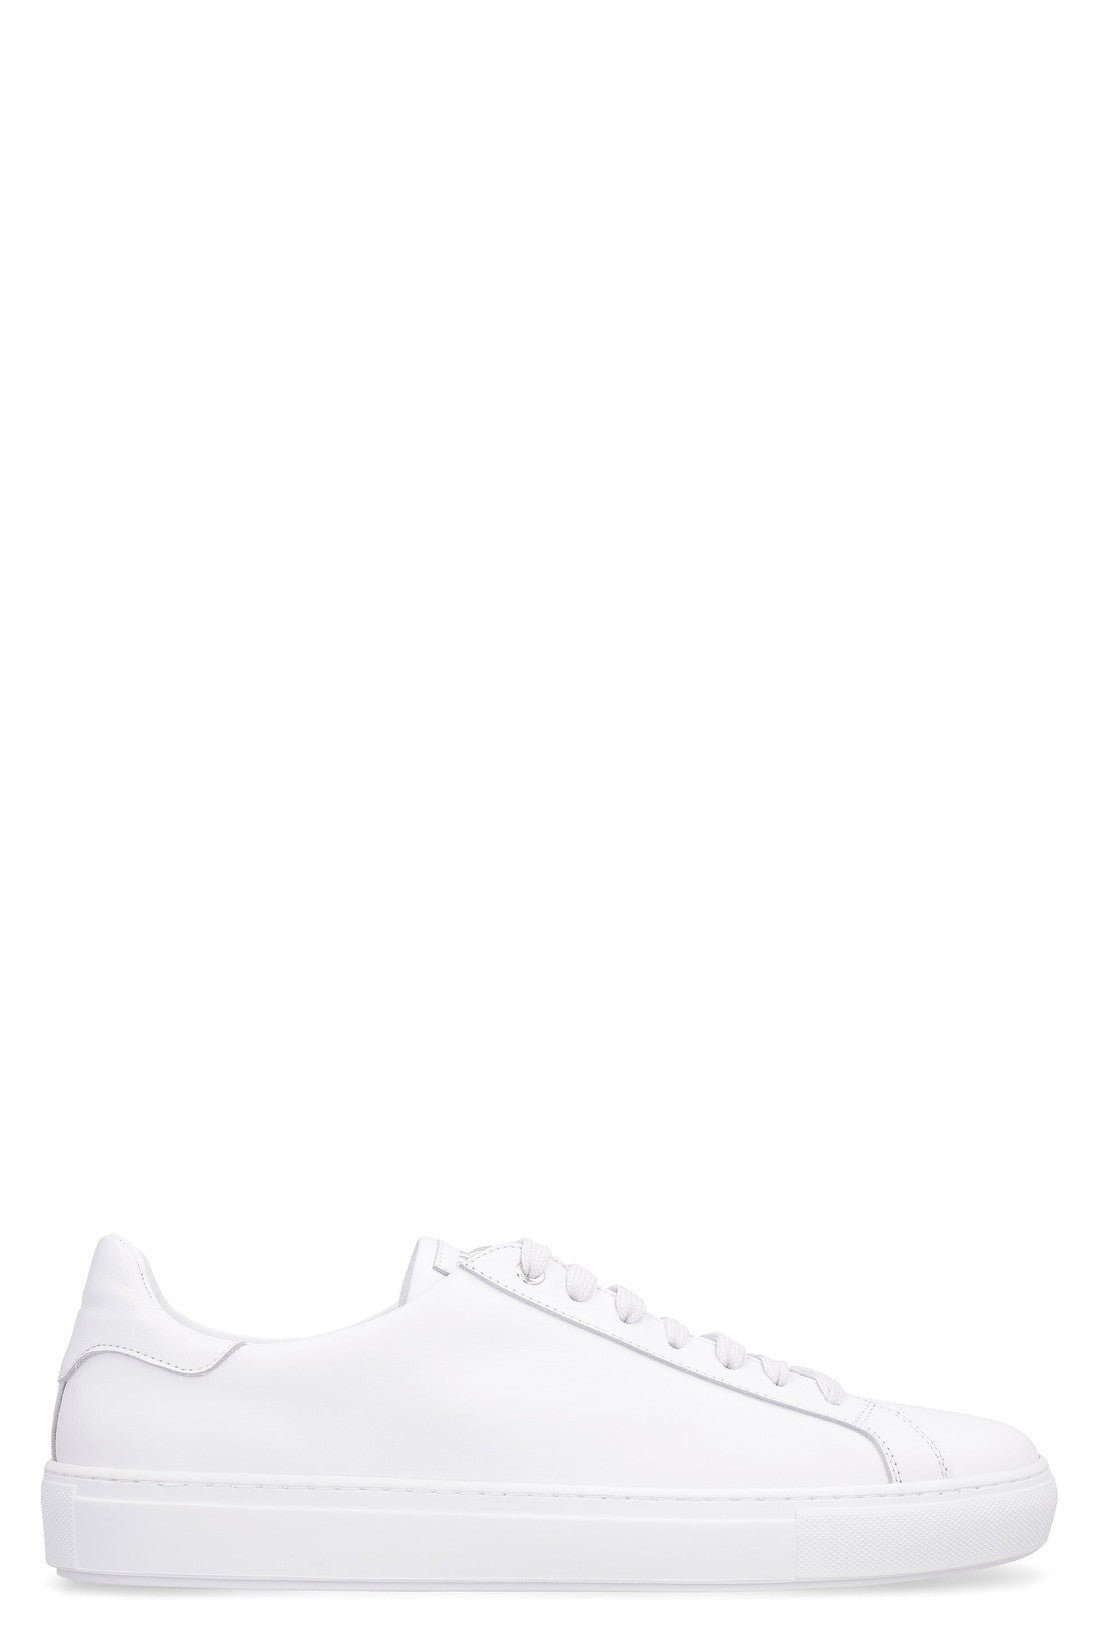 Canali-OUTLET-SALE-Leather low-top sneakers-ARCHIVIST